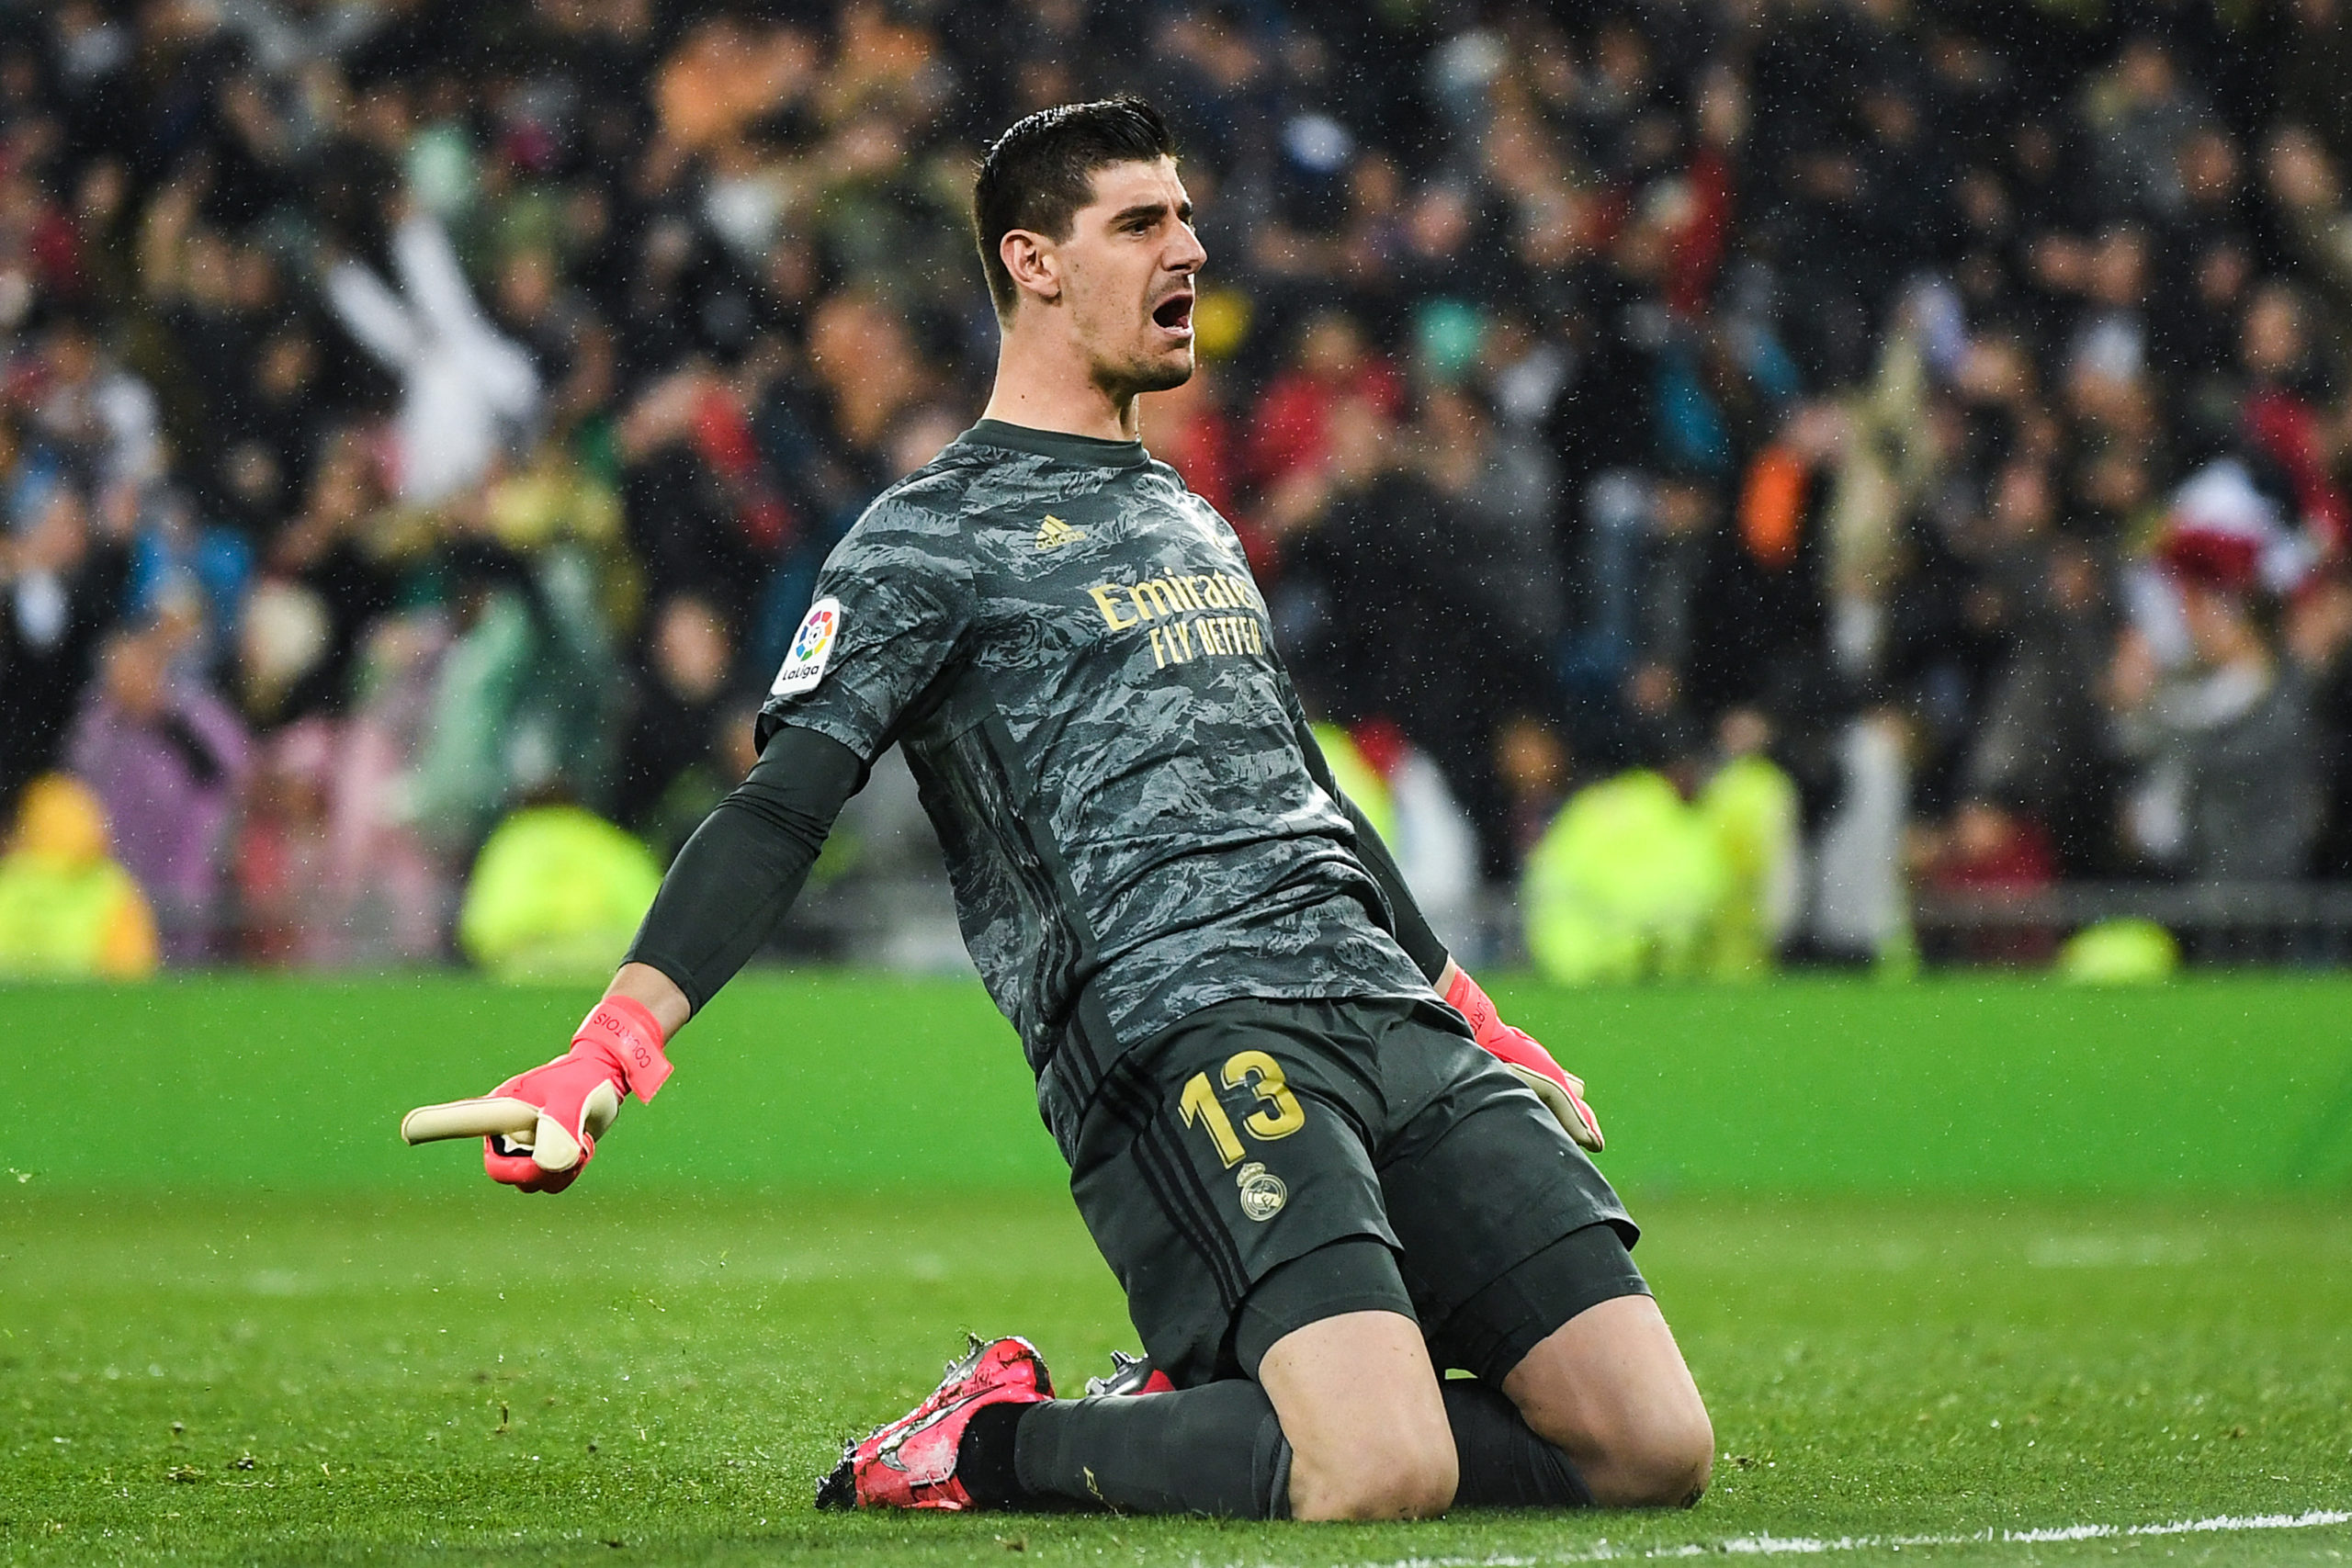 Thibaut Courtois 1 1 Top 5 goalkeepers in the world in July 2021